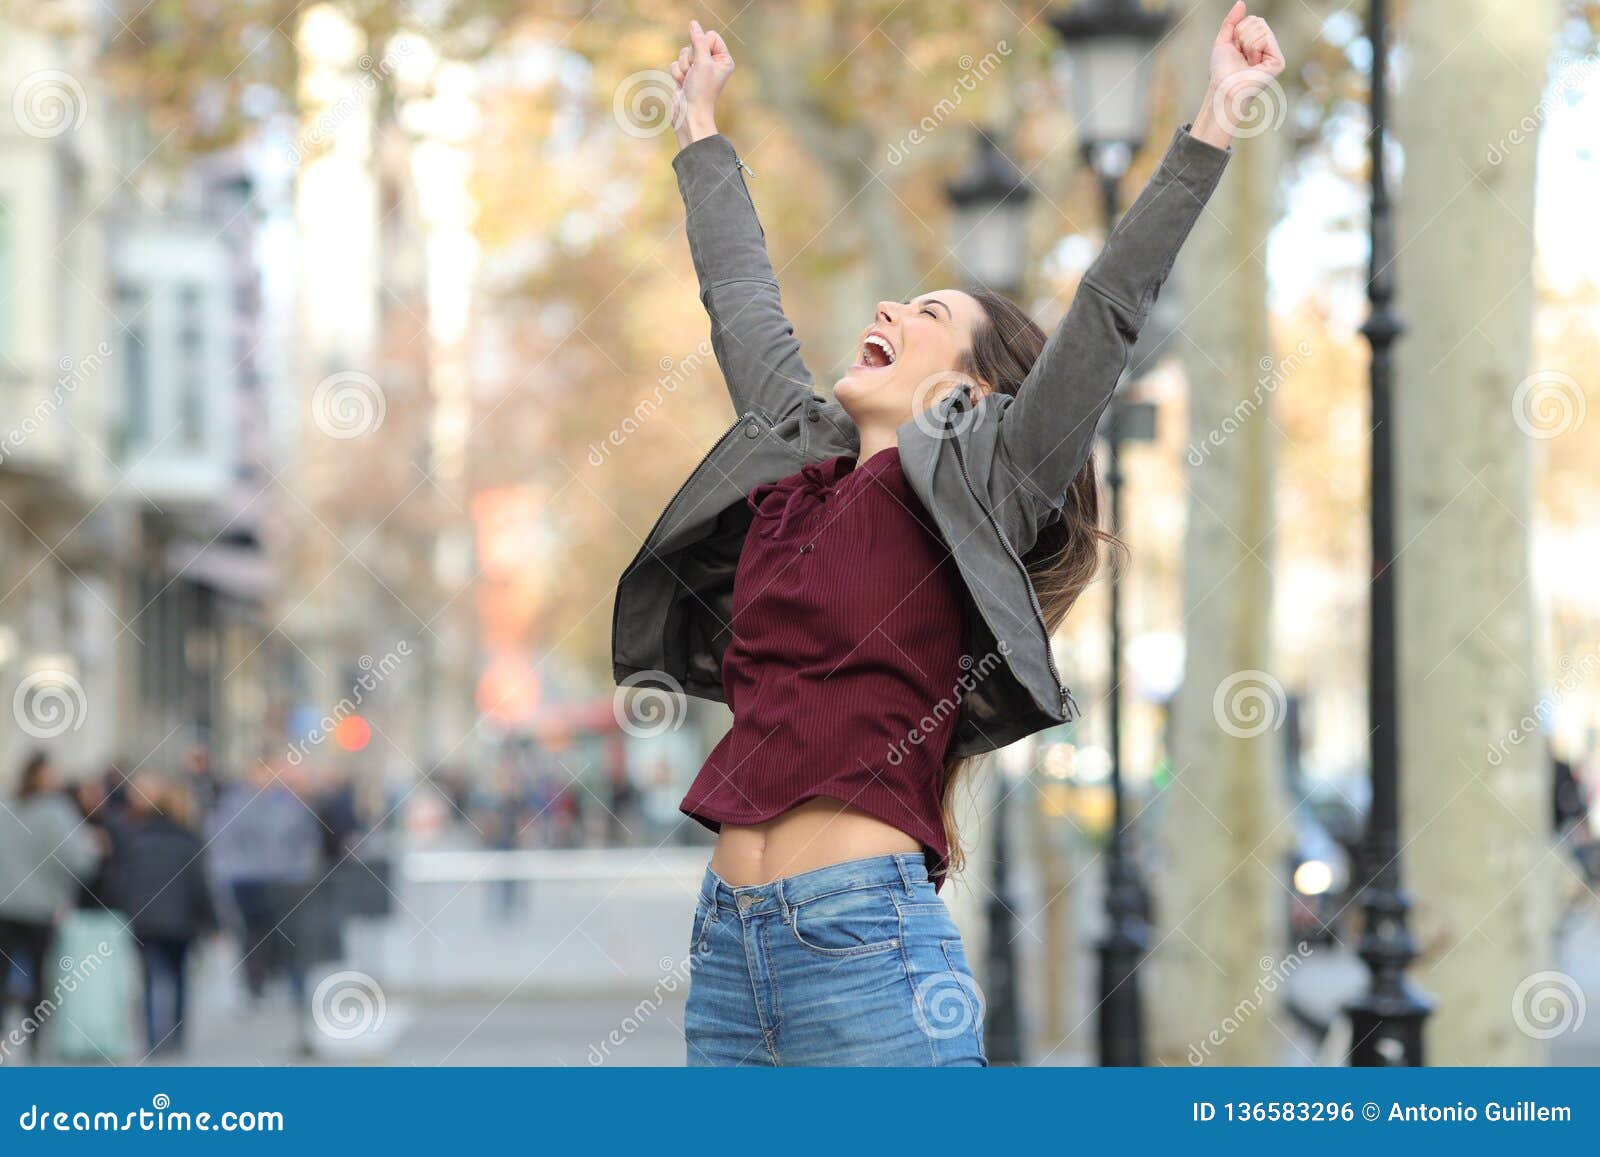 excited woman jumping in the street